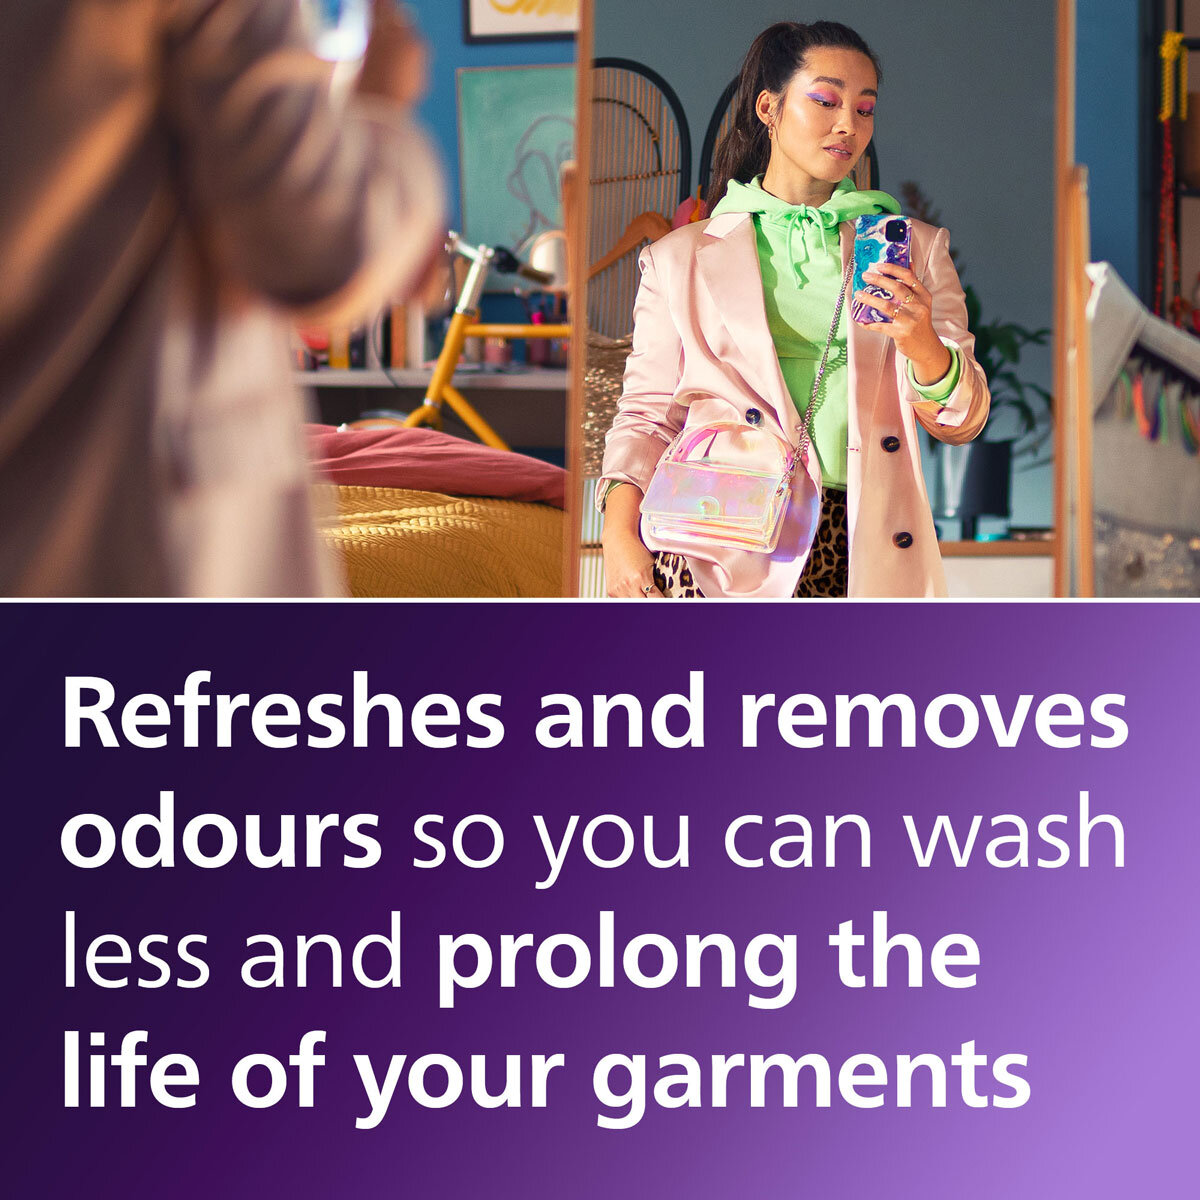 Image of Philips Handheld Steamer describing how it refreshes clothing